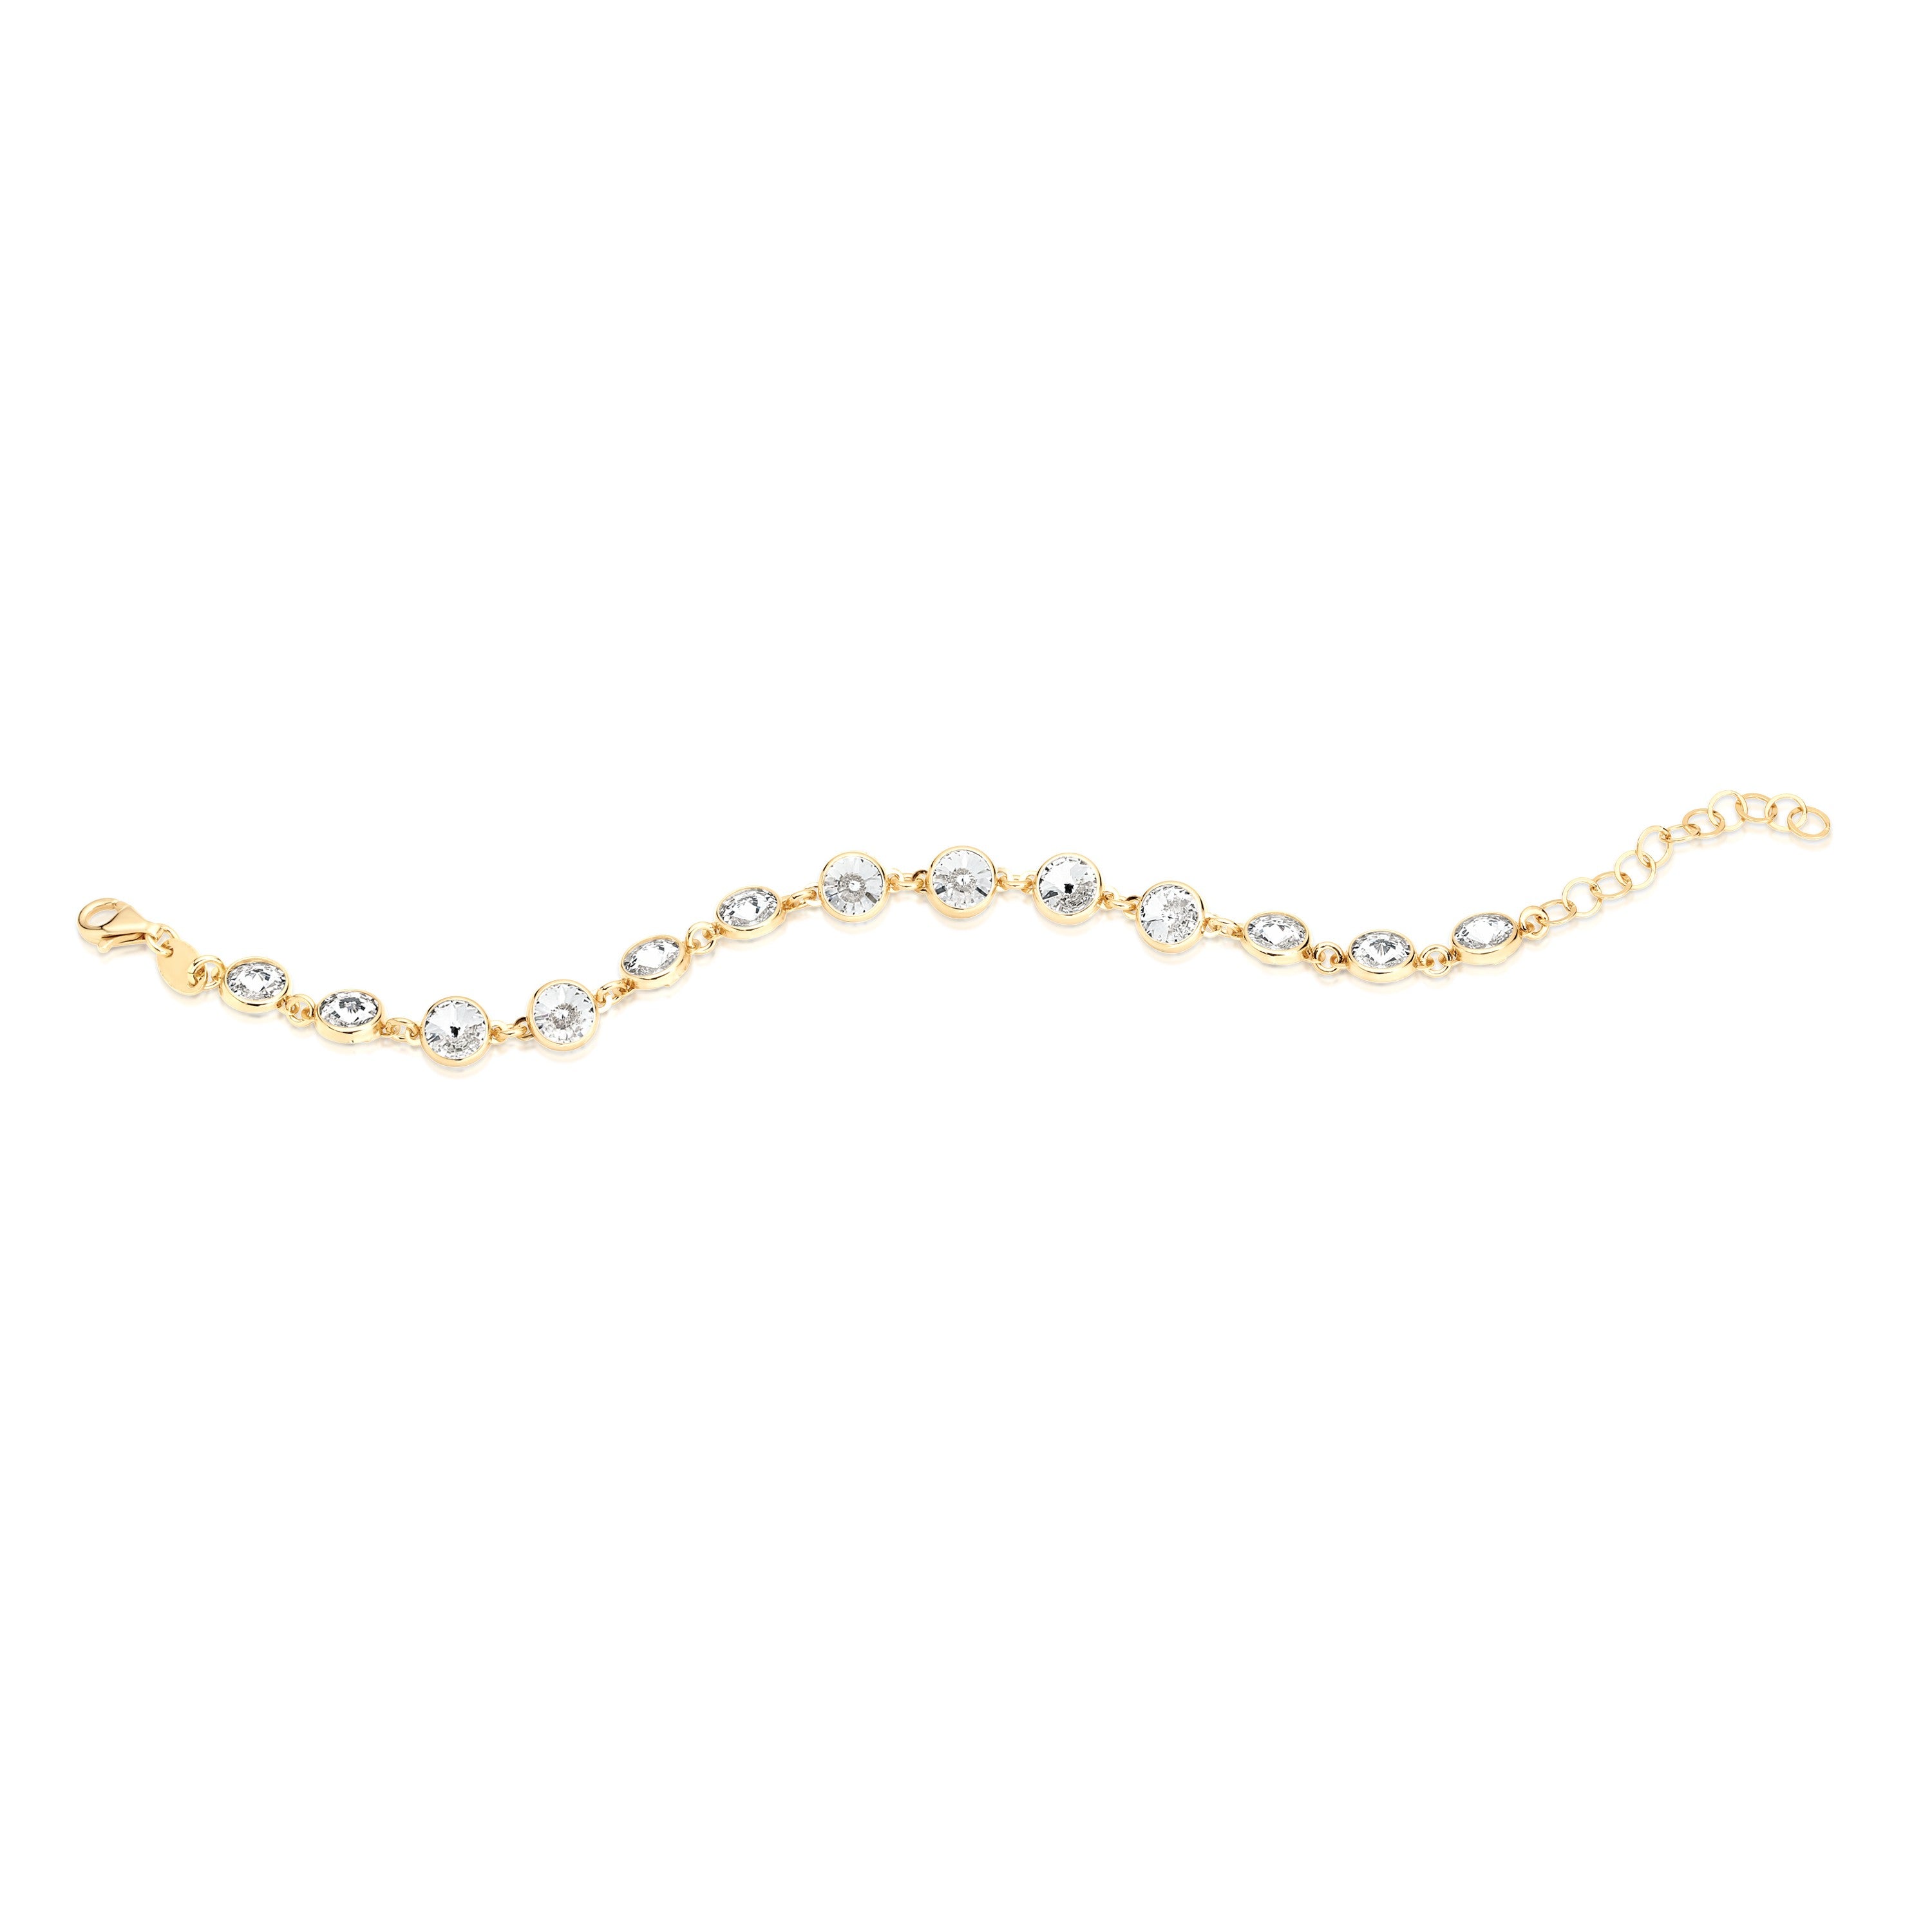 Sterling Silver Gold Plated Bracelet by Davvero with Crystals from Swarovski®